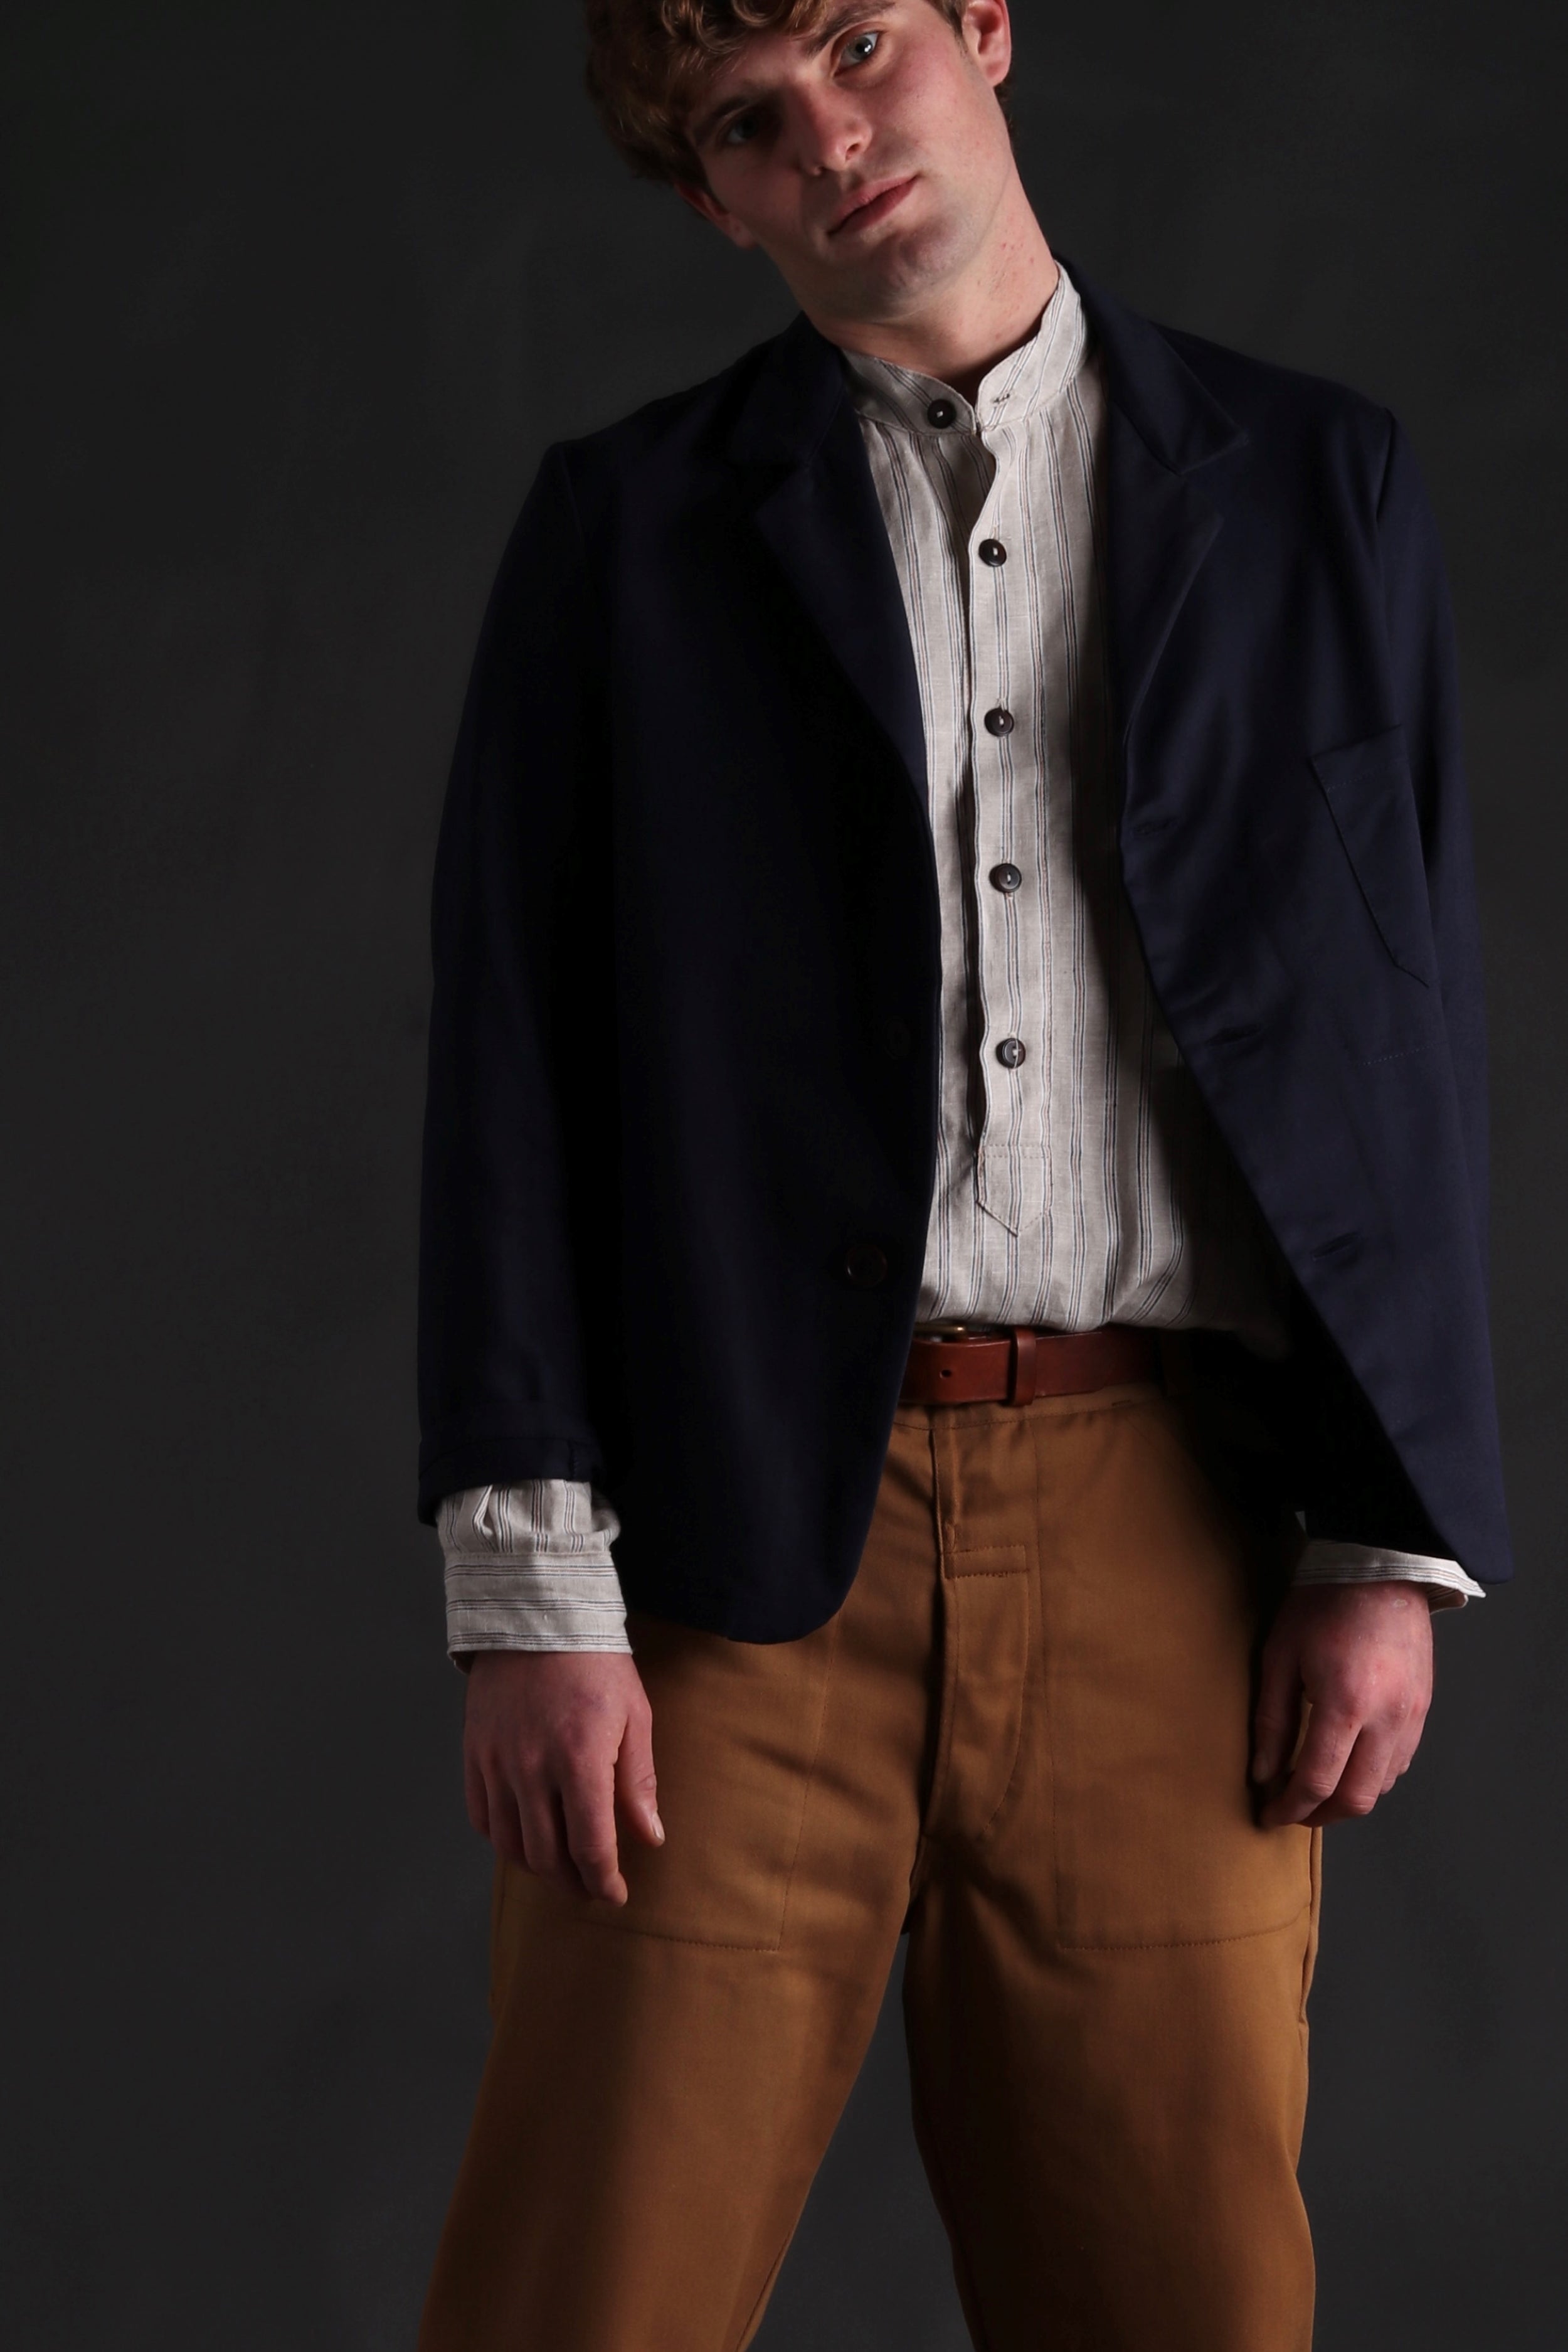 Man wears Carrier Company Collarless Shirt in Natural Linen with Three Button Navy Jacket and Tan Work Trousers